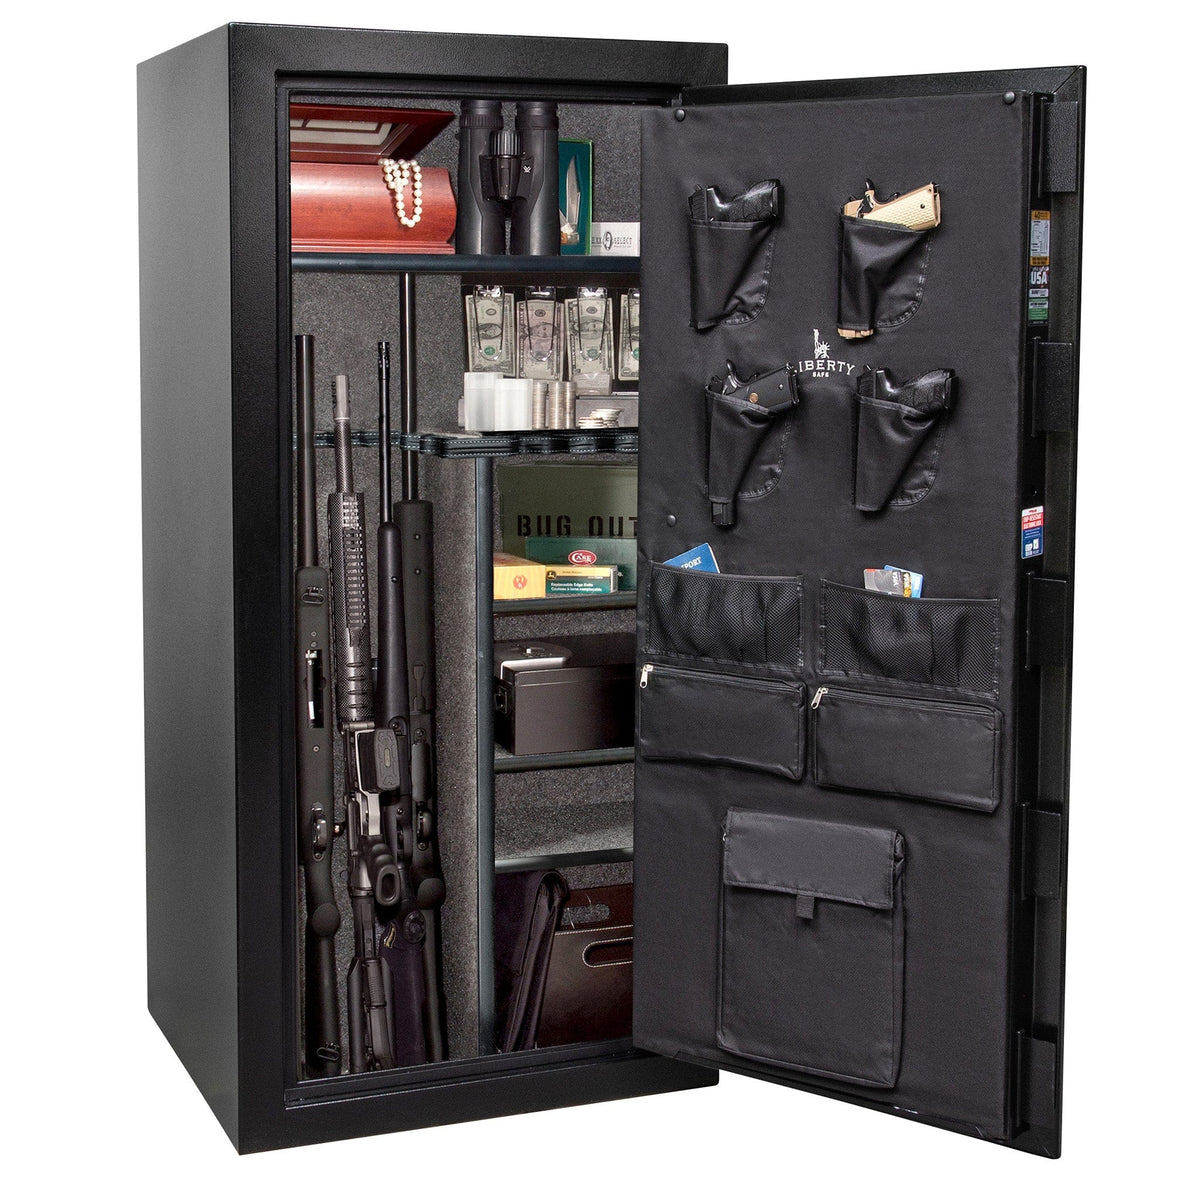 Centurion Series | Level 1 Security | 30 Minute Fire Protection | Liberty Safe Norcal.